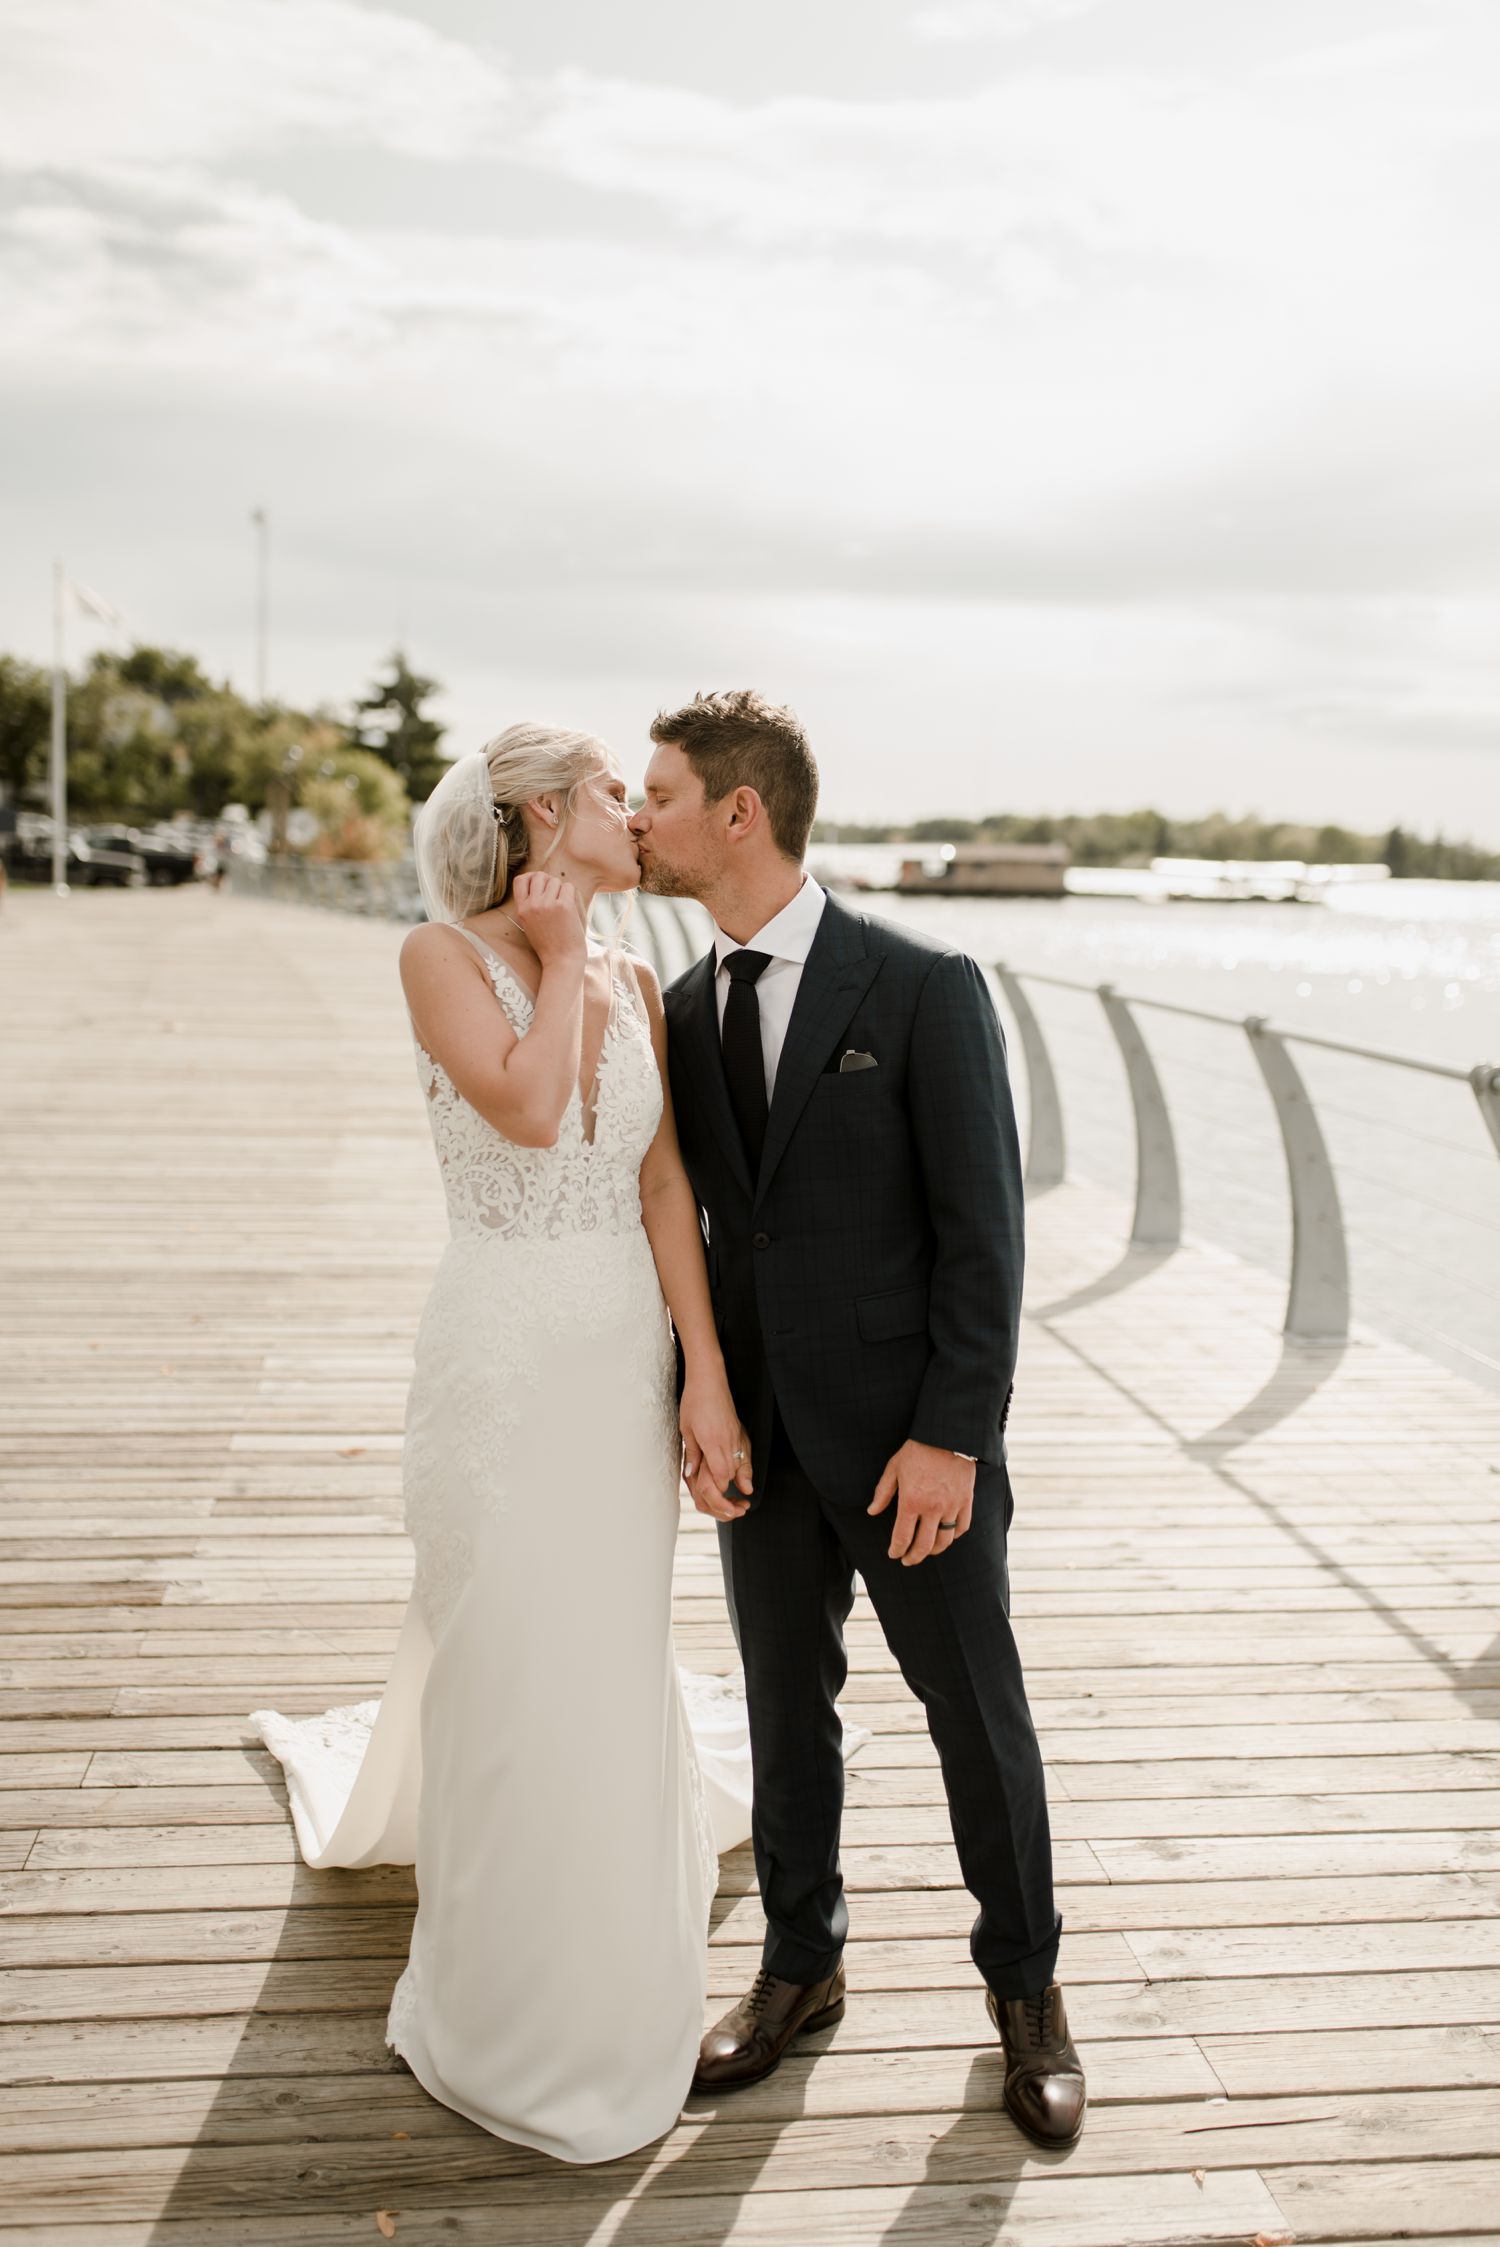 Kenora Lakeside wedding at the Clarion Inn in Ontario, photographed by Vanessa Renae Photography, a Winnipeg and Kenora wedding and elopement photographer